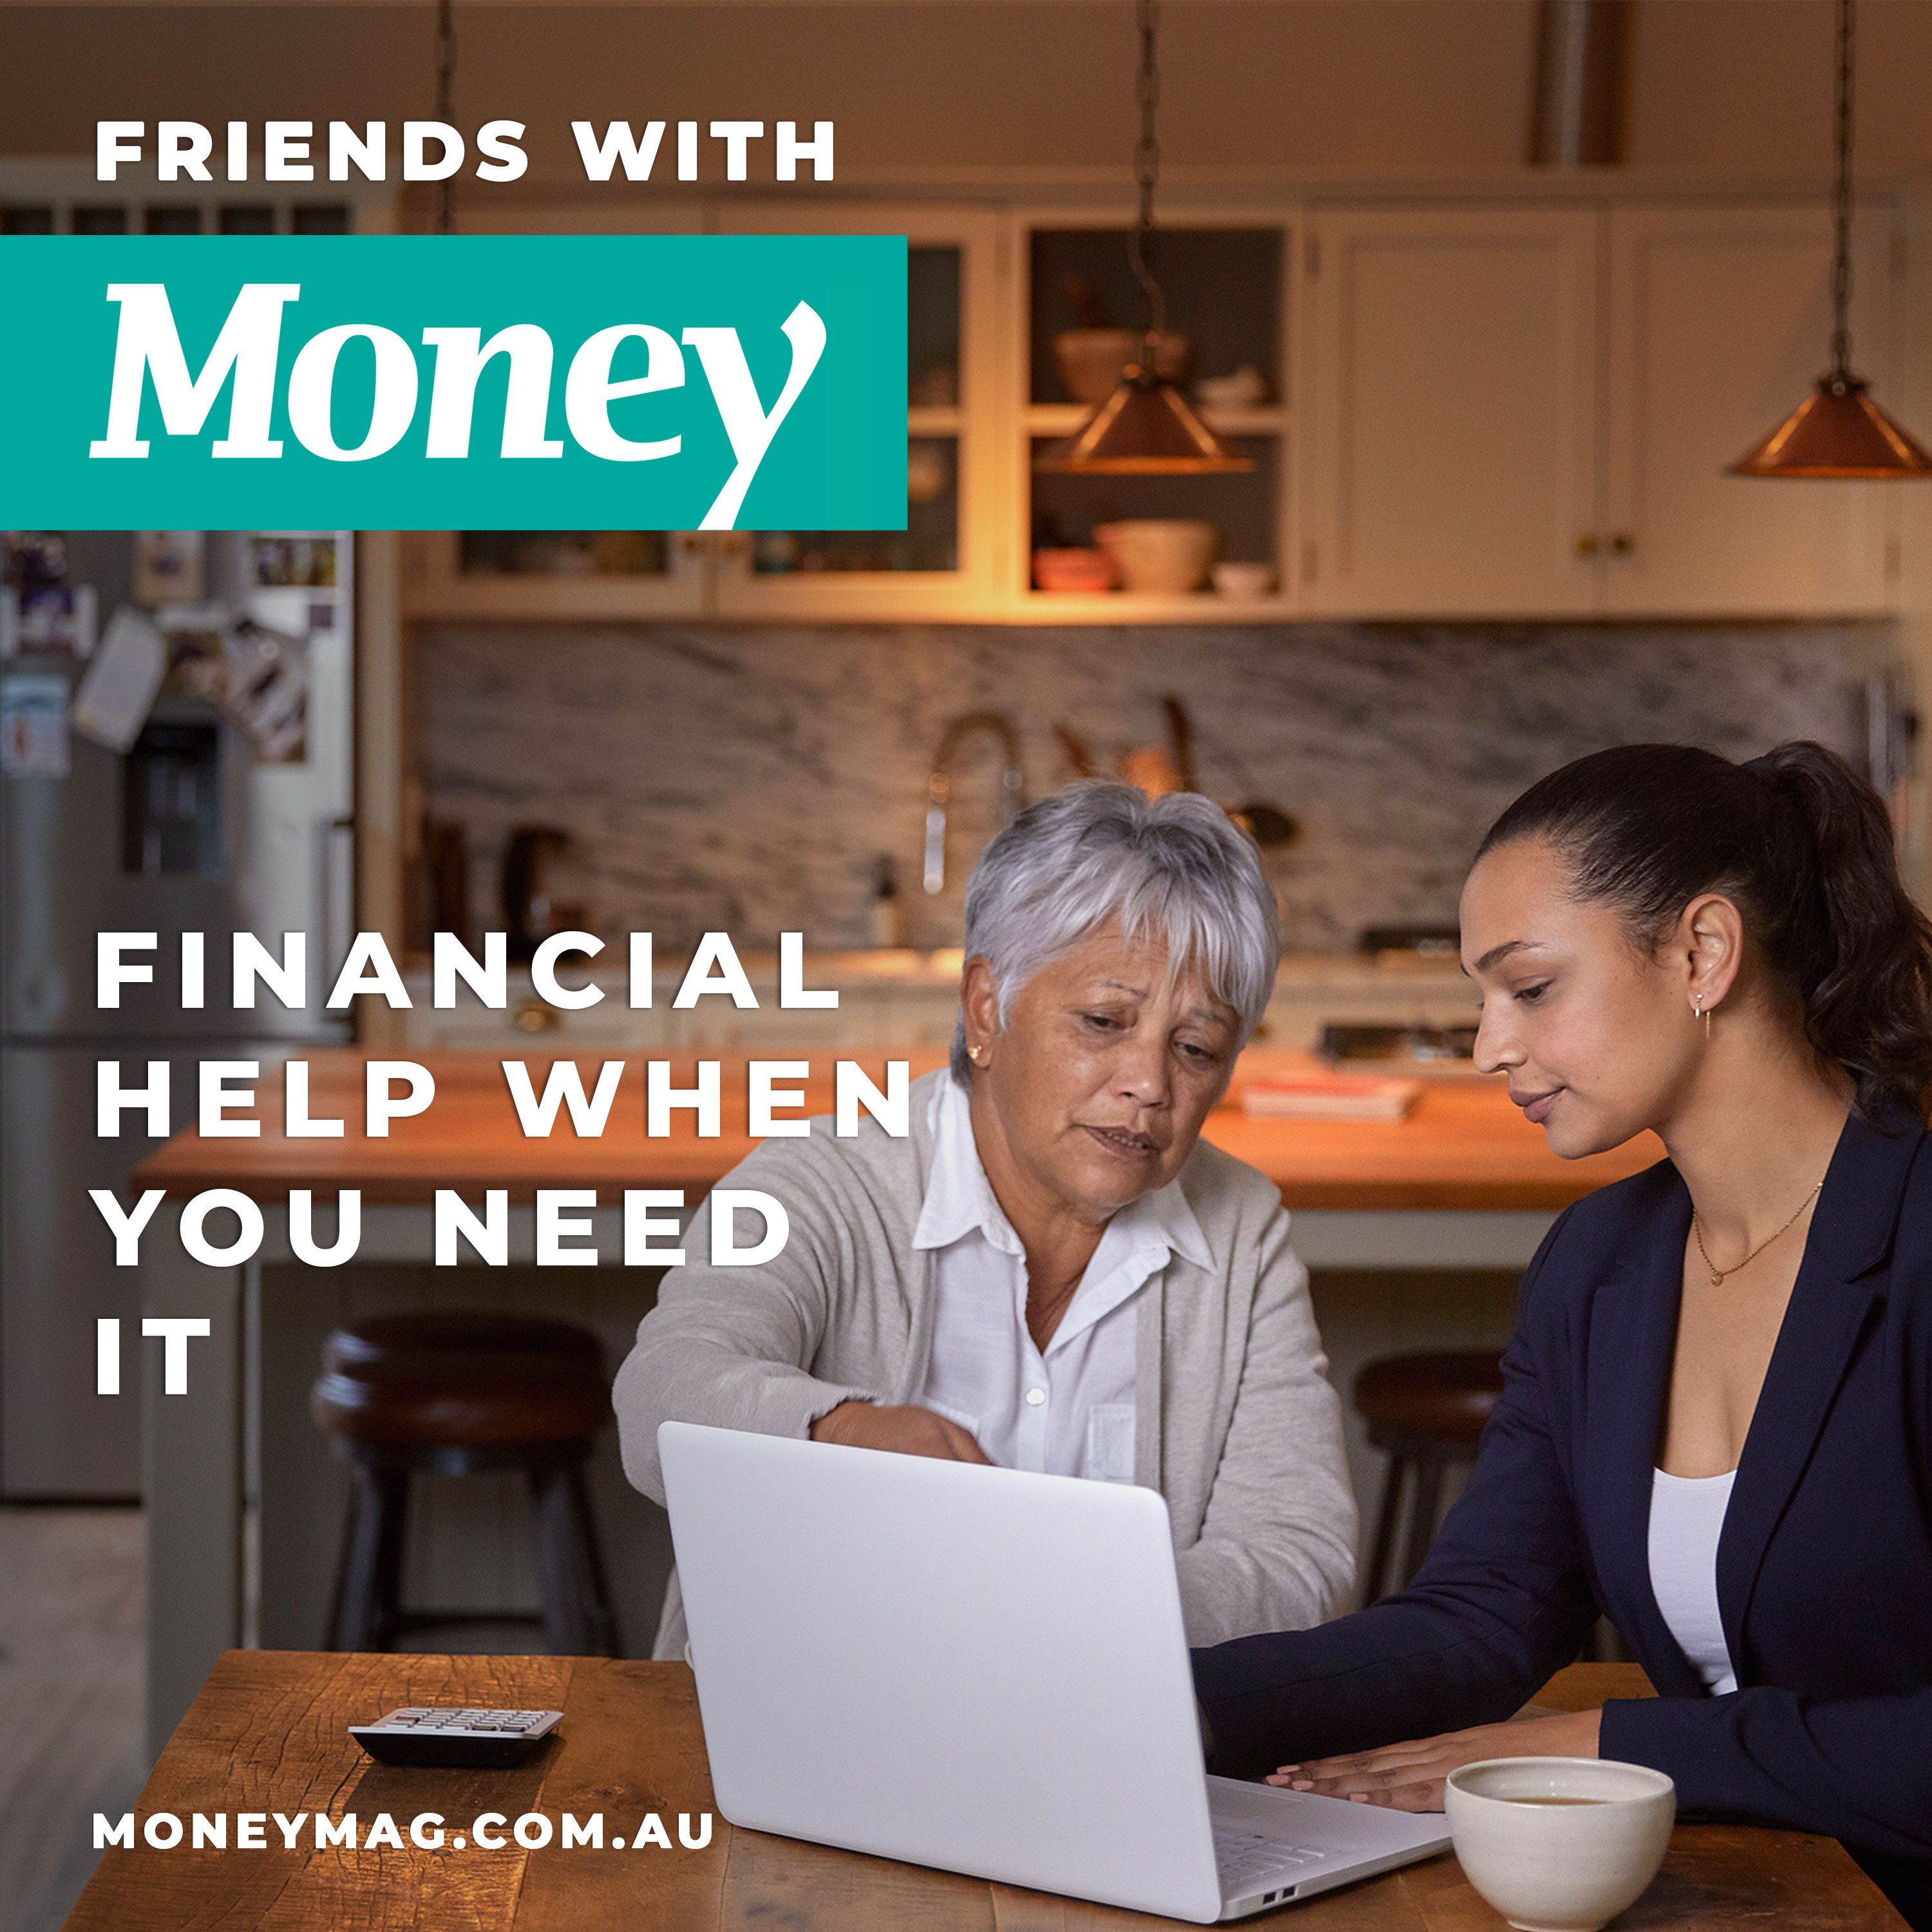 Financial help when you need it